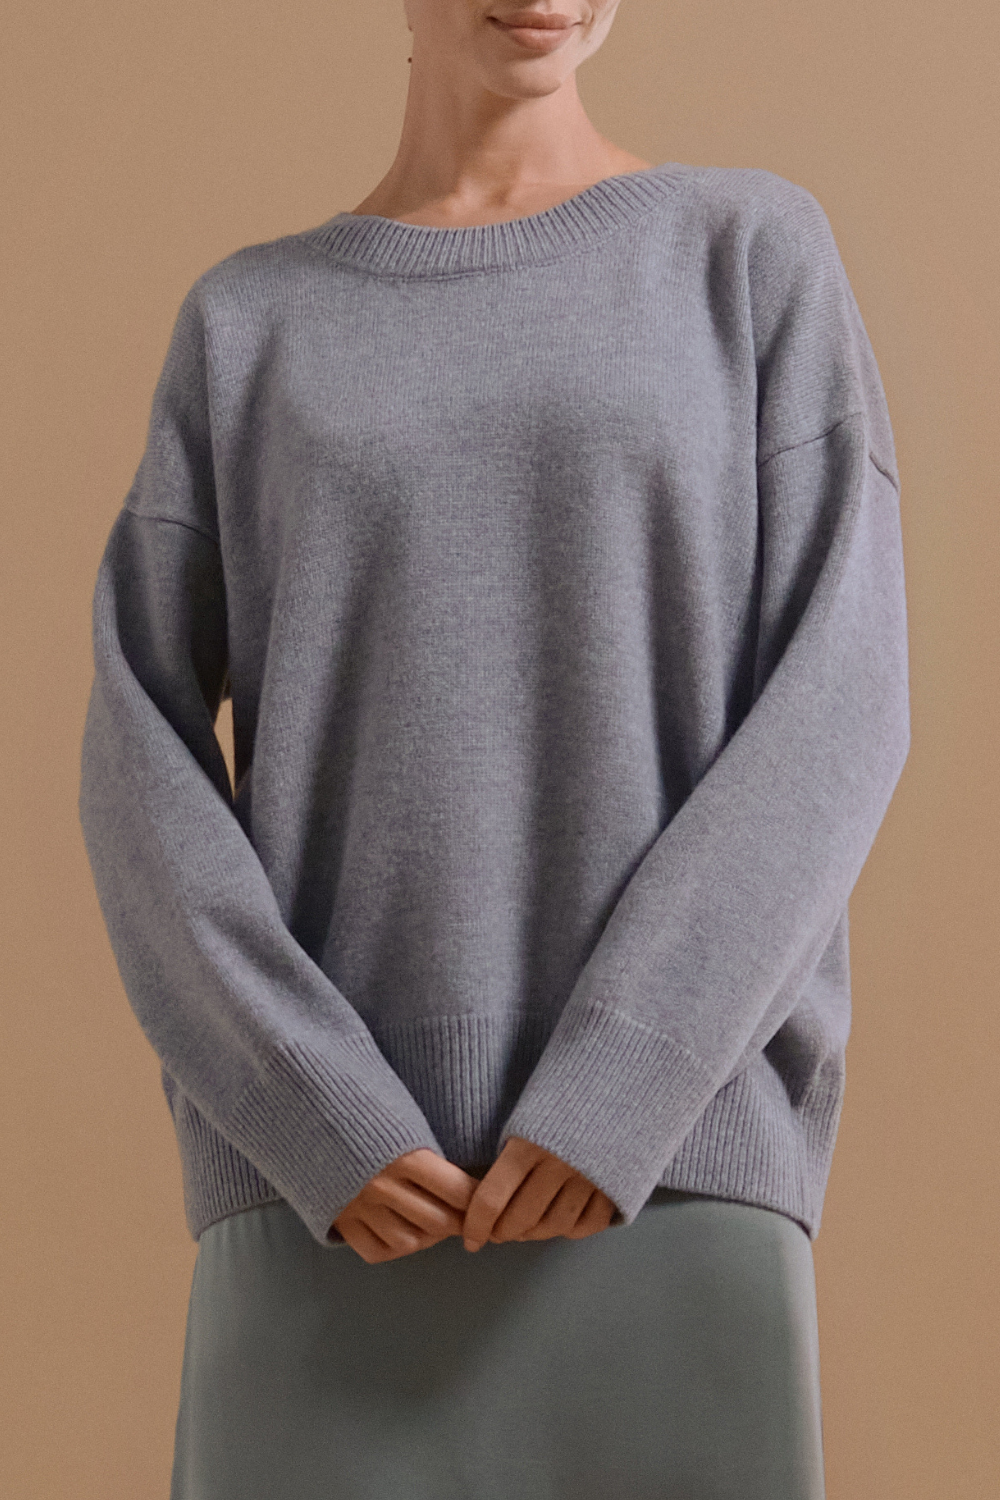 Cashmere sweater, gray color (THE LAW OF LOVE) K-009